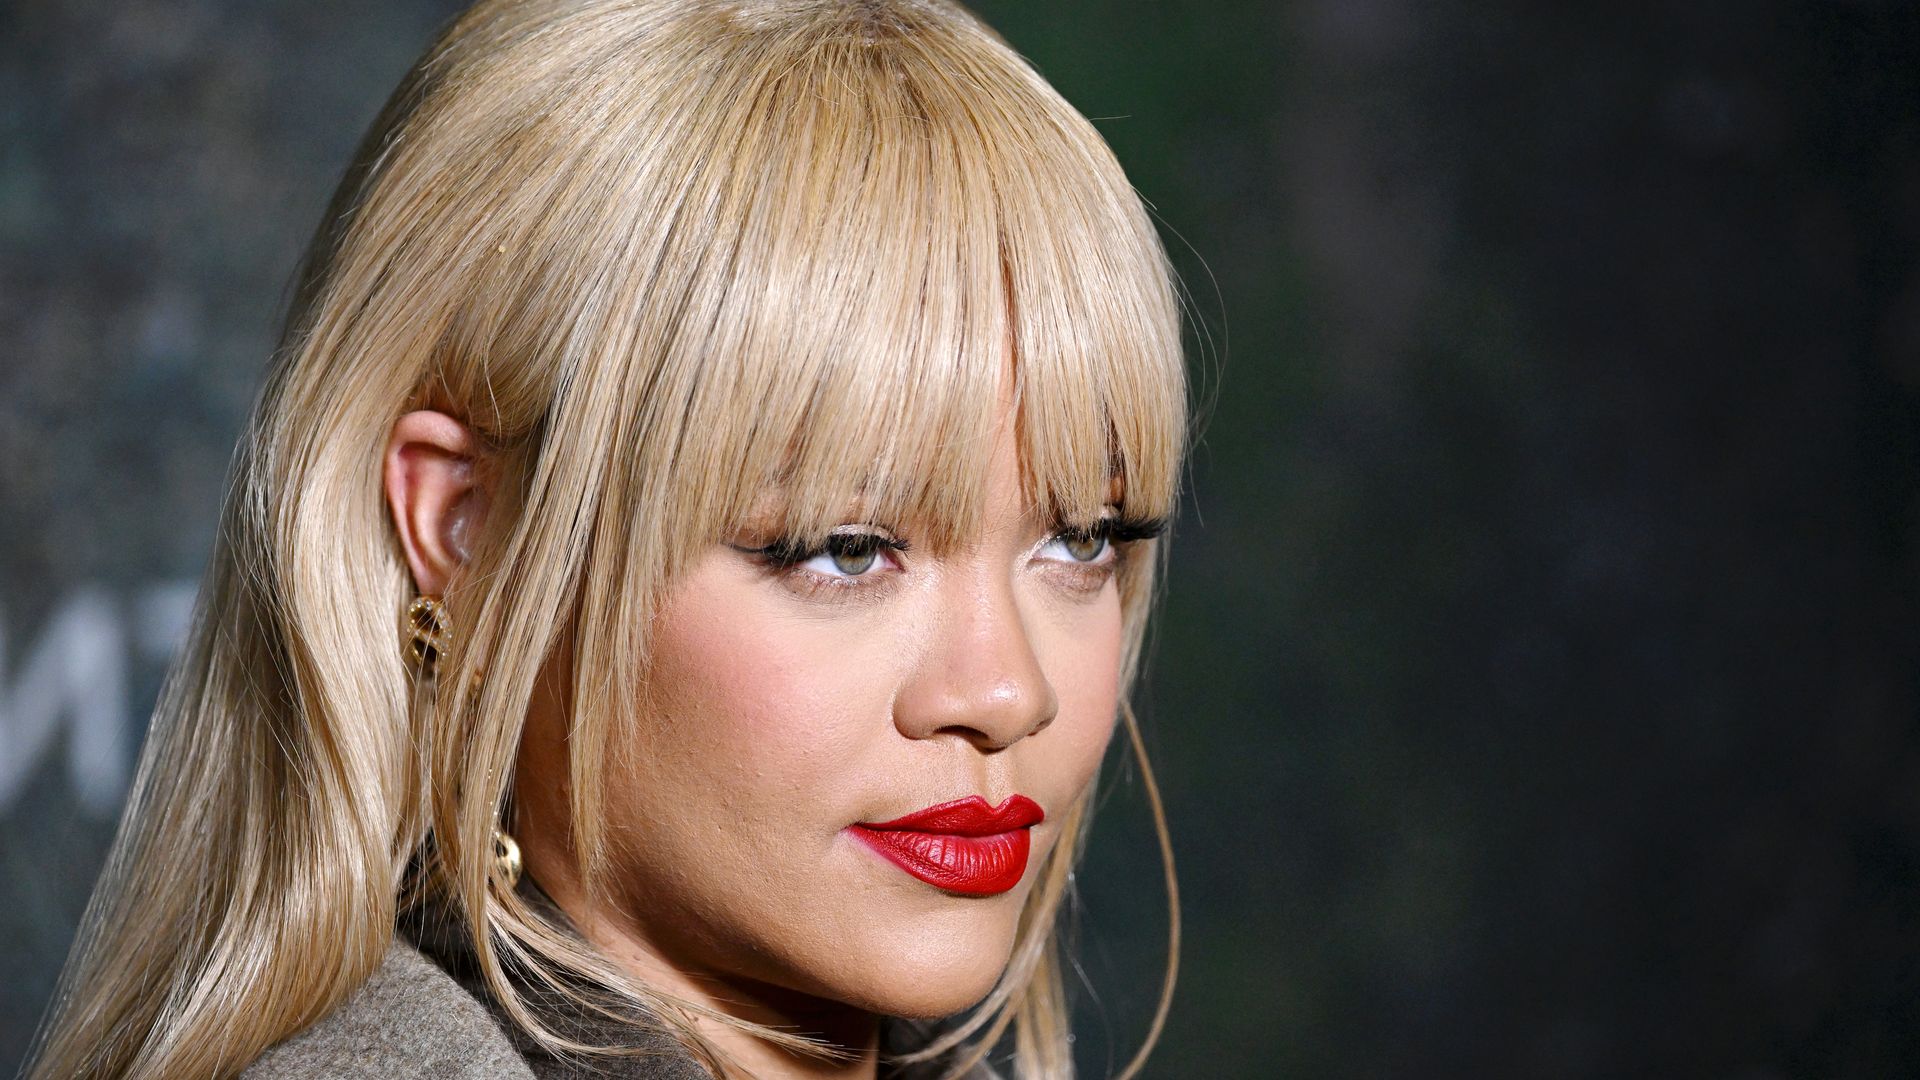 Rihanna reflects on her past fashion looks that she 'would never do' as a mom